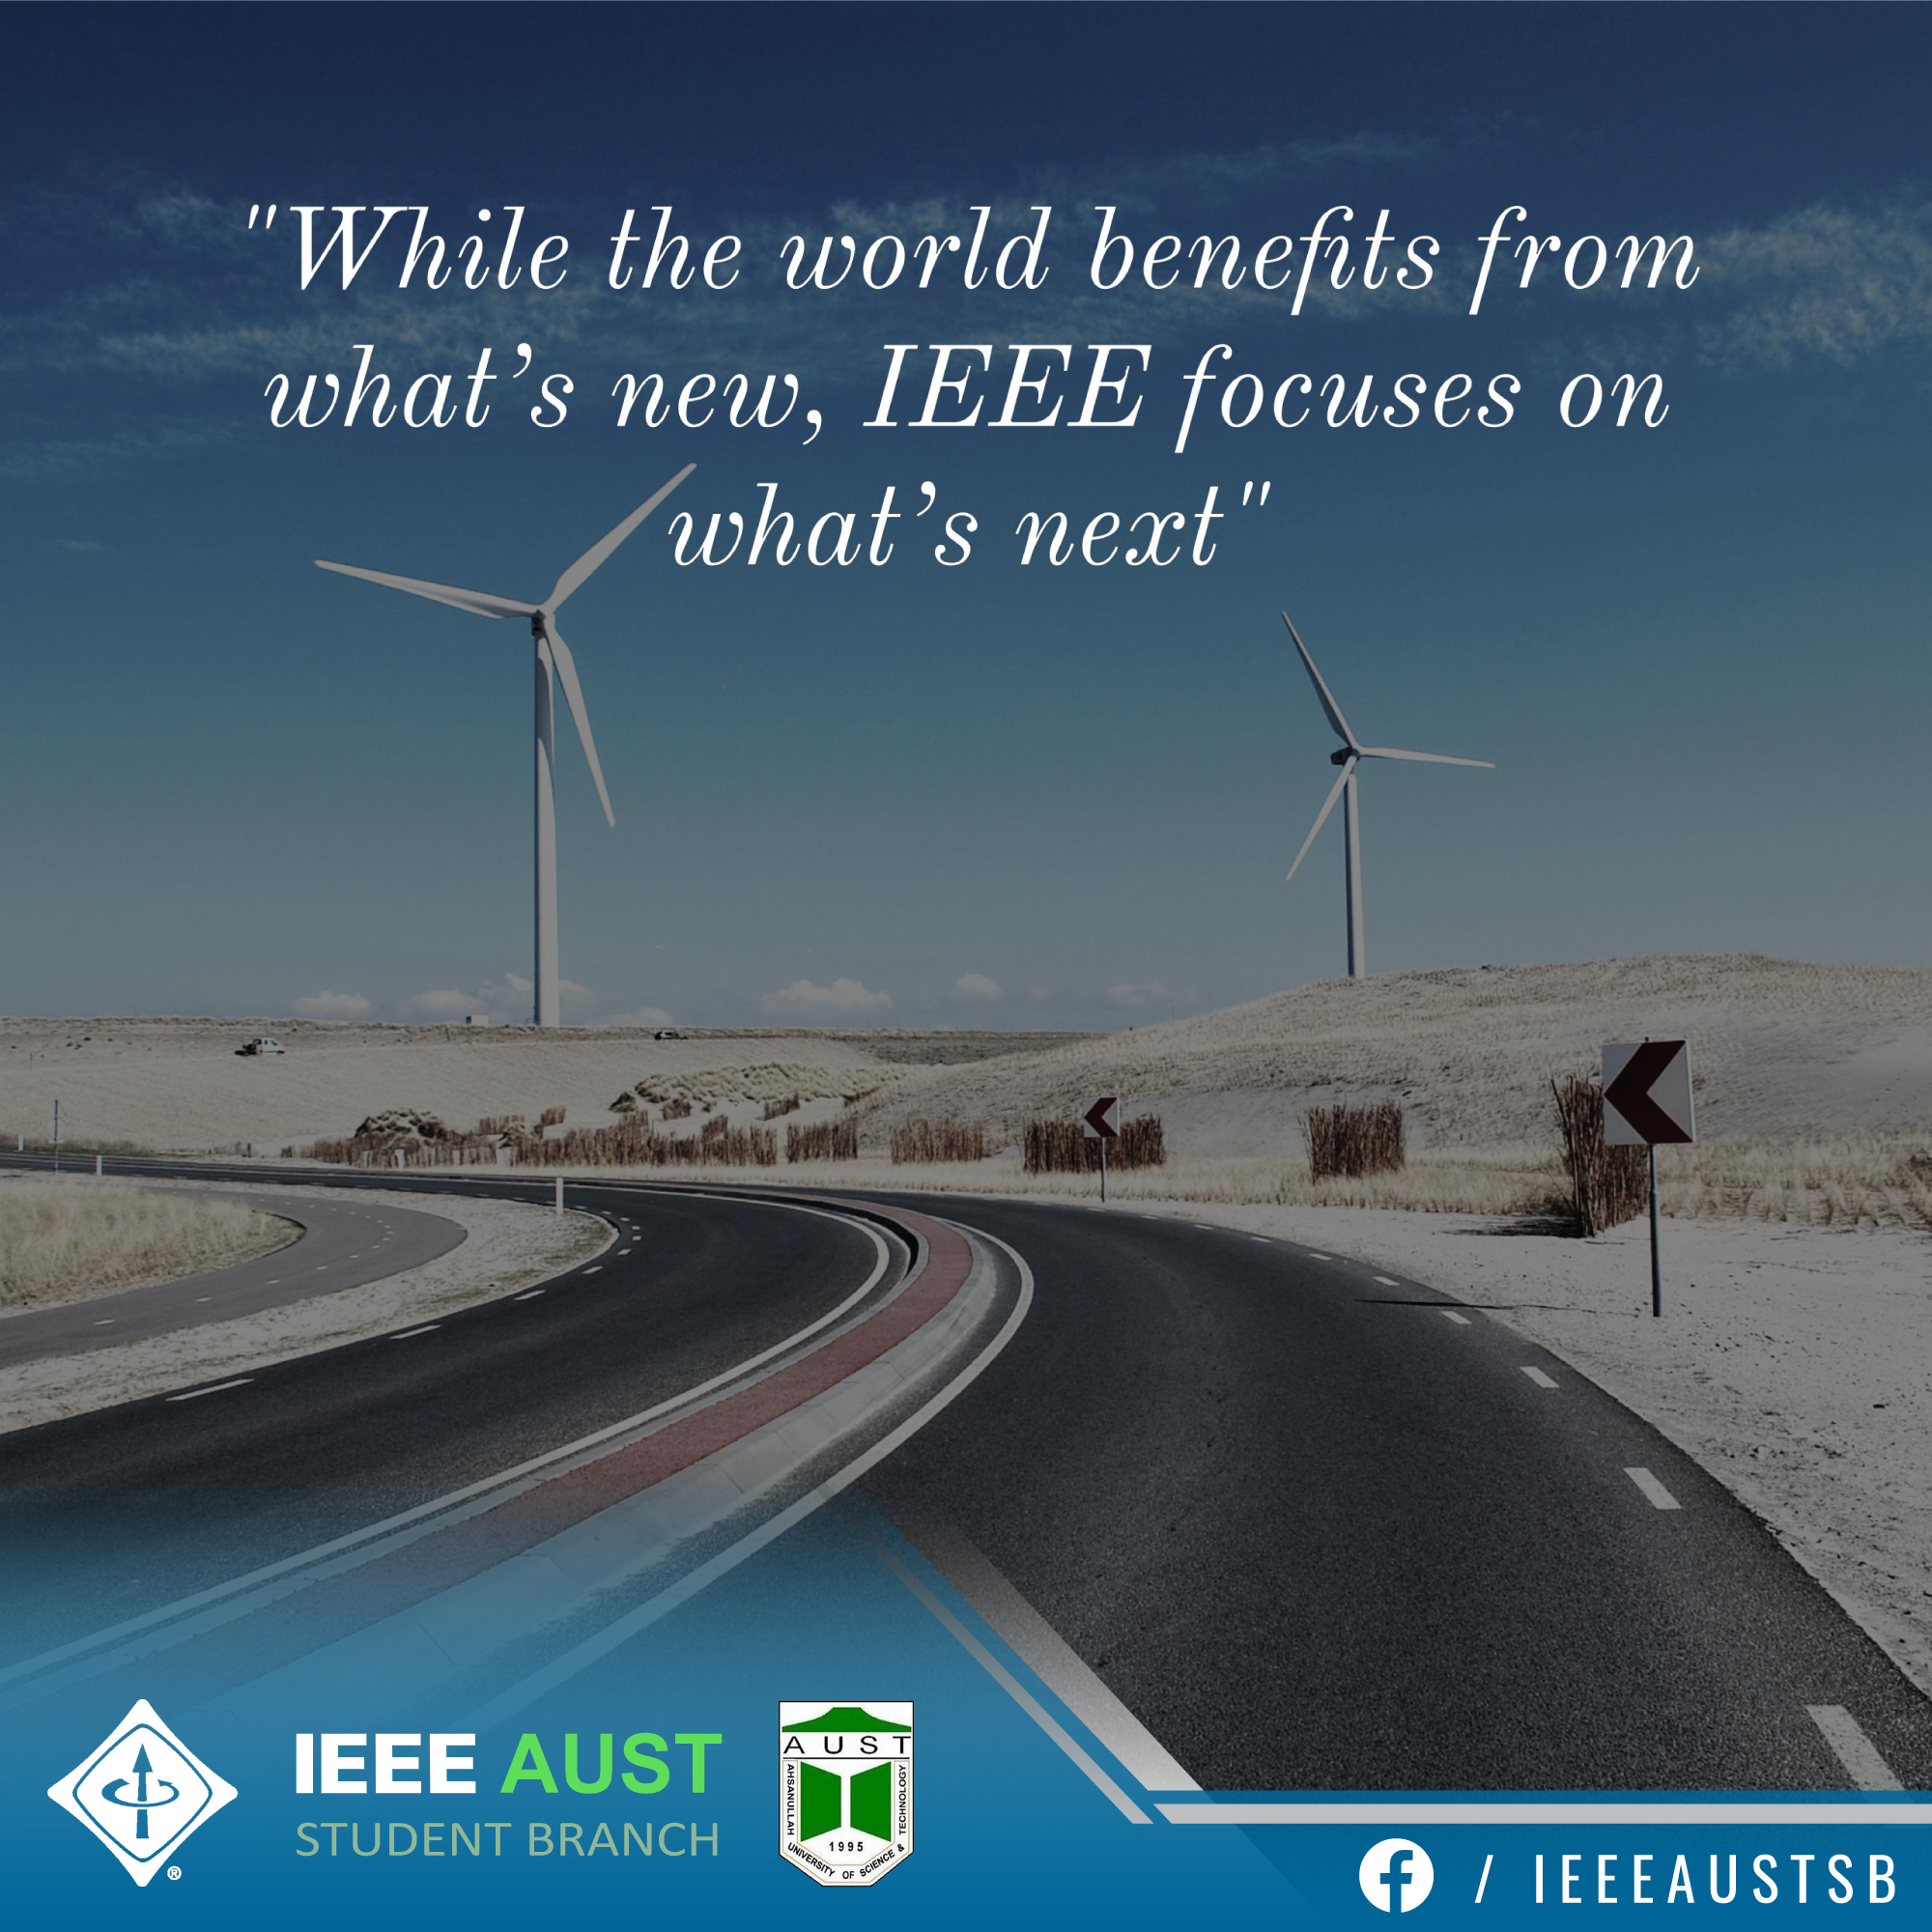 While the world benefits from what's new, IEEE focuses on what's next!